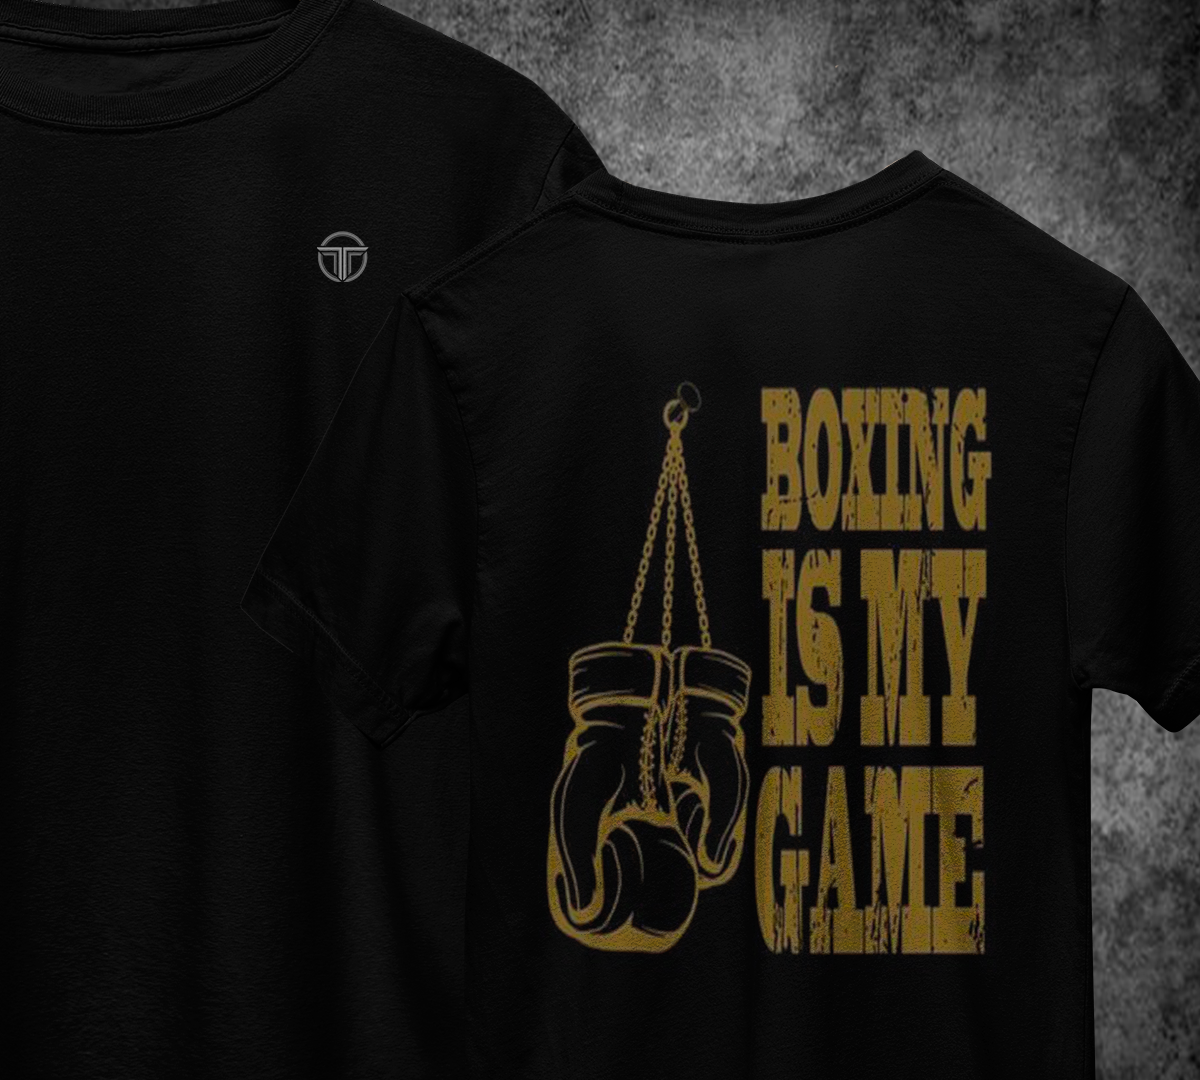 Nome do produto: T-Shirt BOXING IS MY GAME